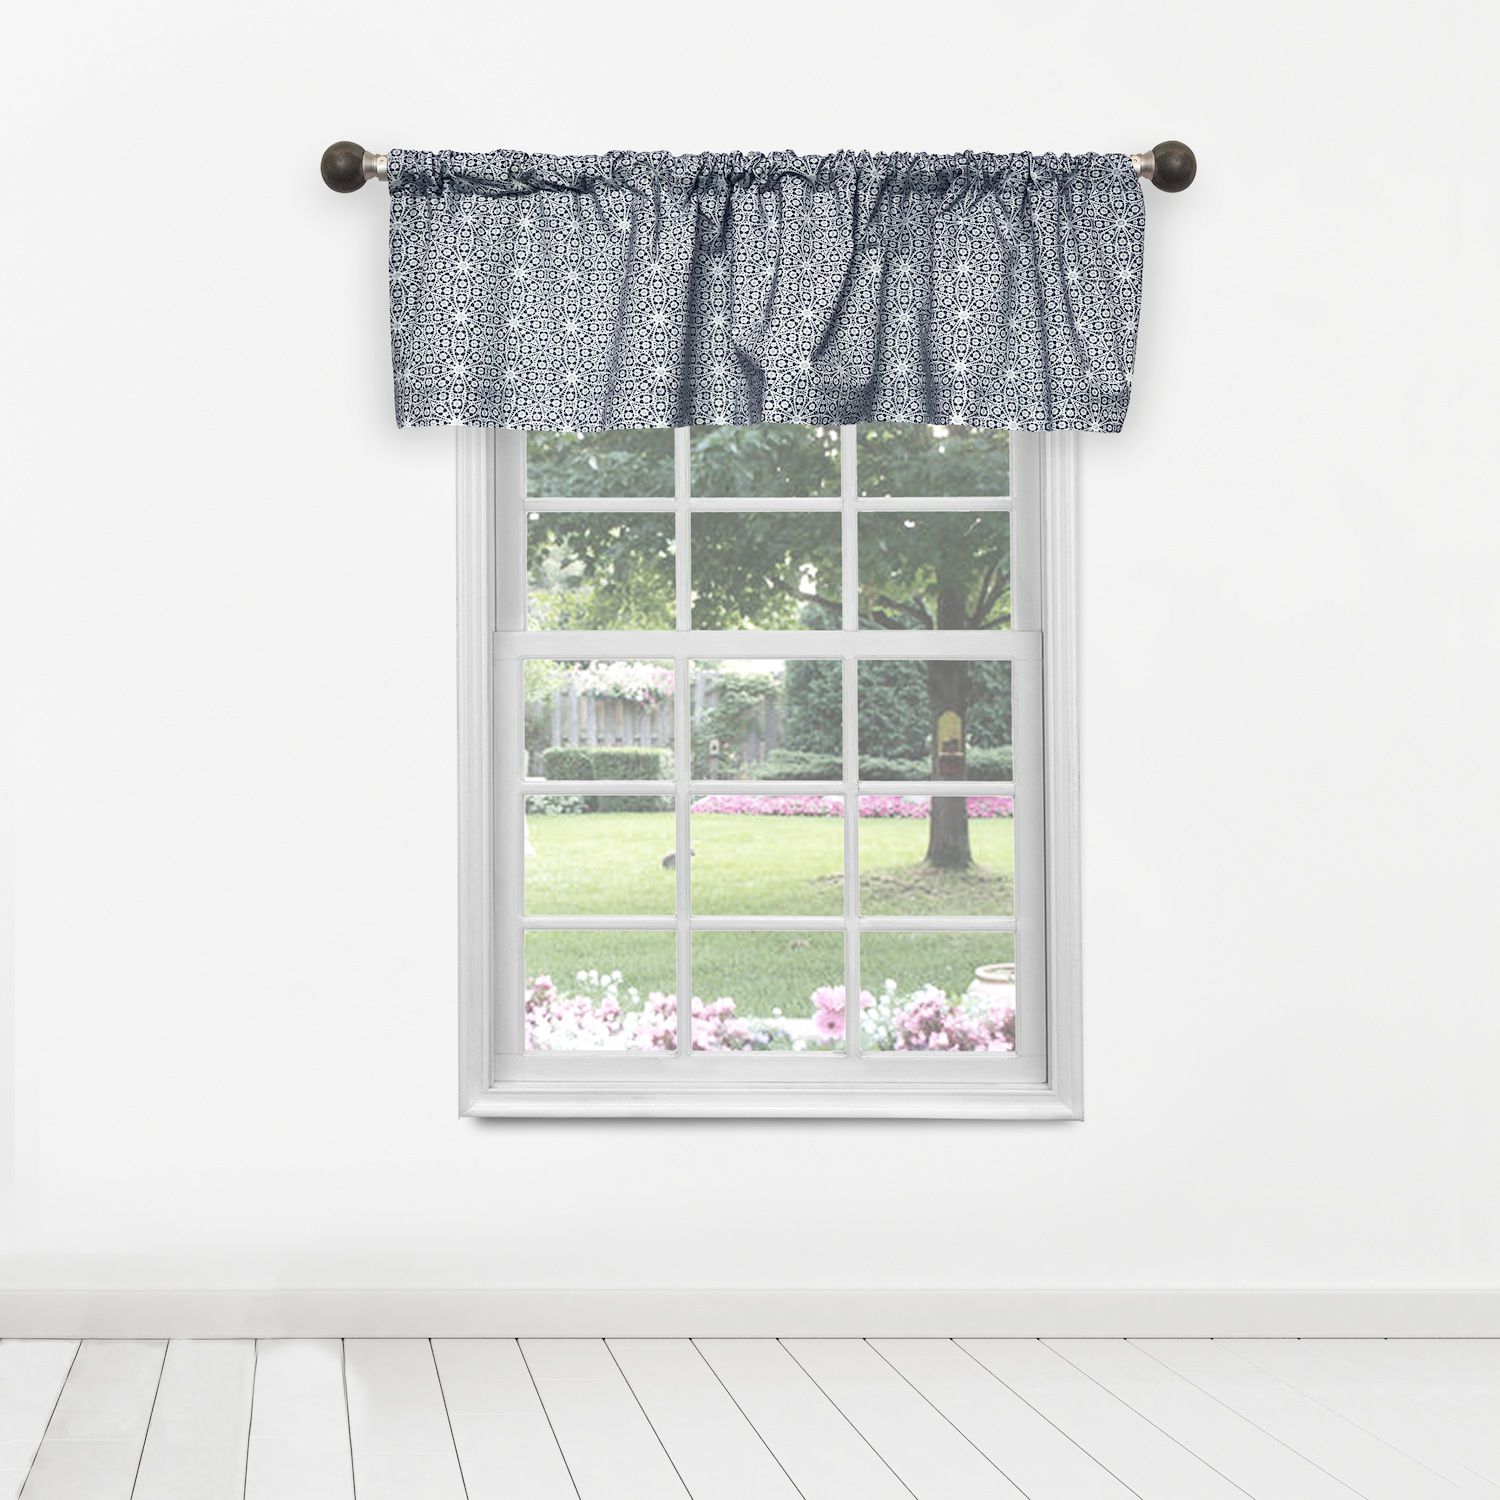 Image for Duck River Textile Liliana Print Valance at Kohl's.